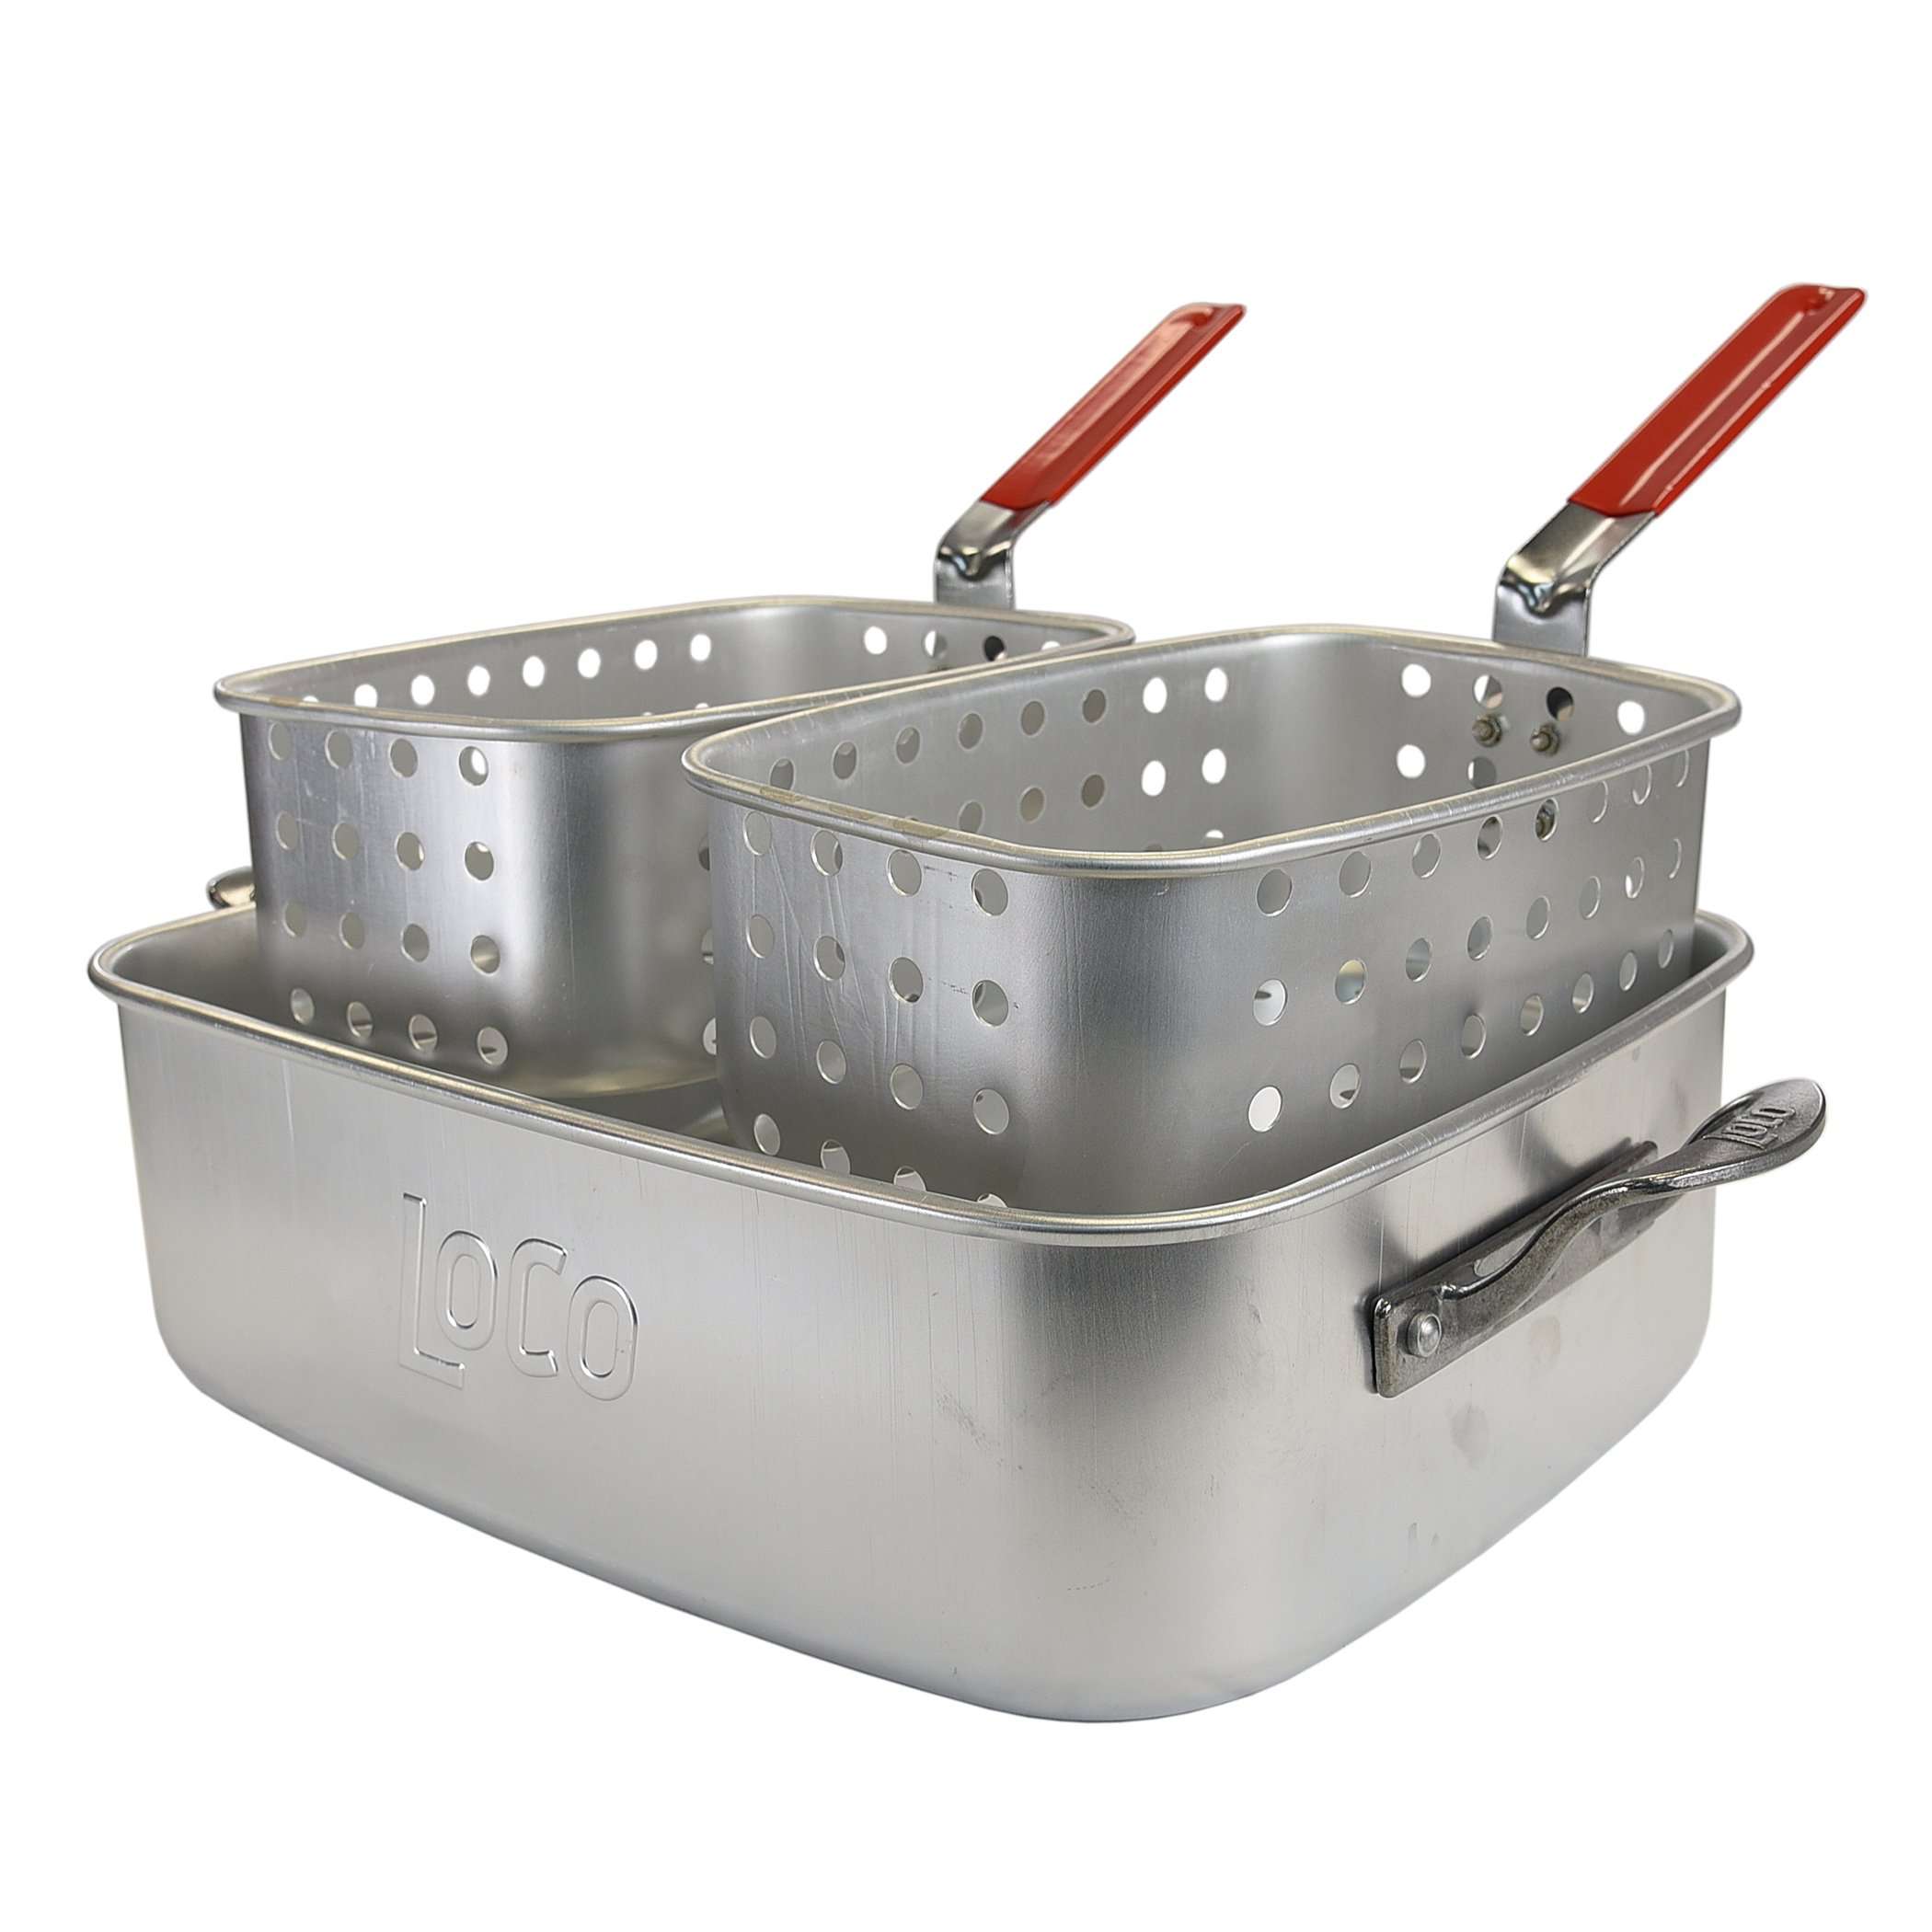 Loco Cookers Propane Dual Burner Fry Cart - LoCo Cookers